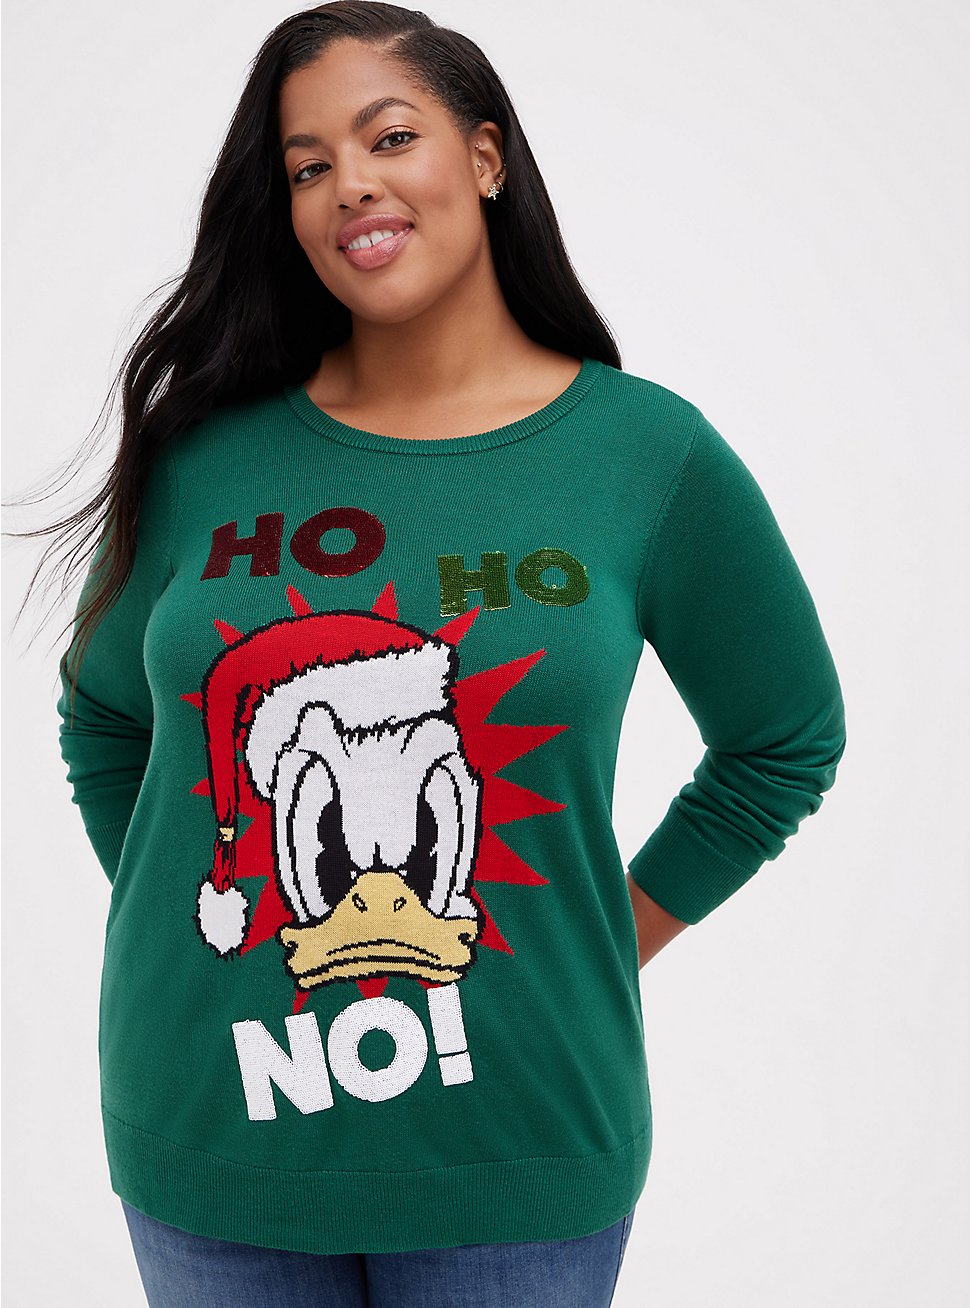 Plus Size Embellished Sweater - Disney Mickey & Friends Donald Duck Ho Ho No Green, EVERGREEN, hi-res